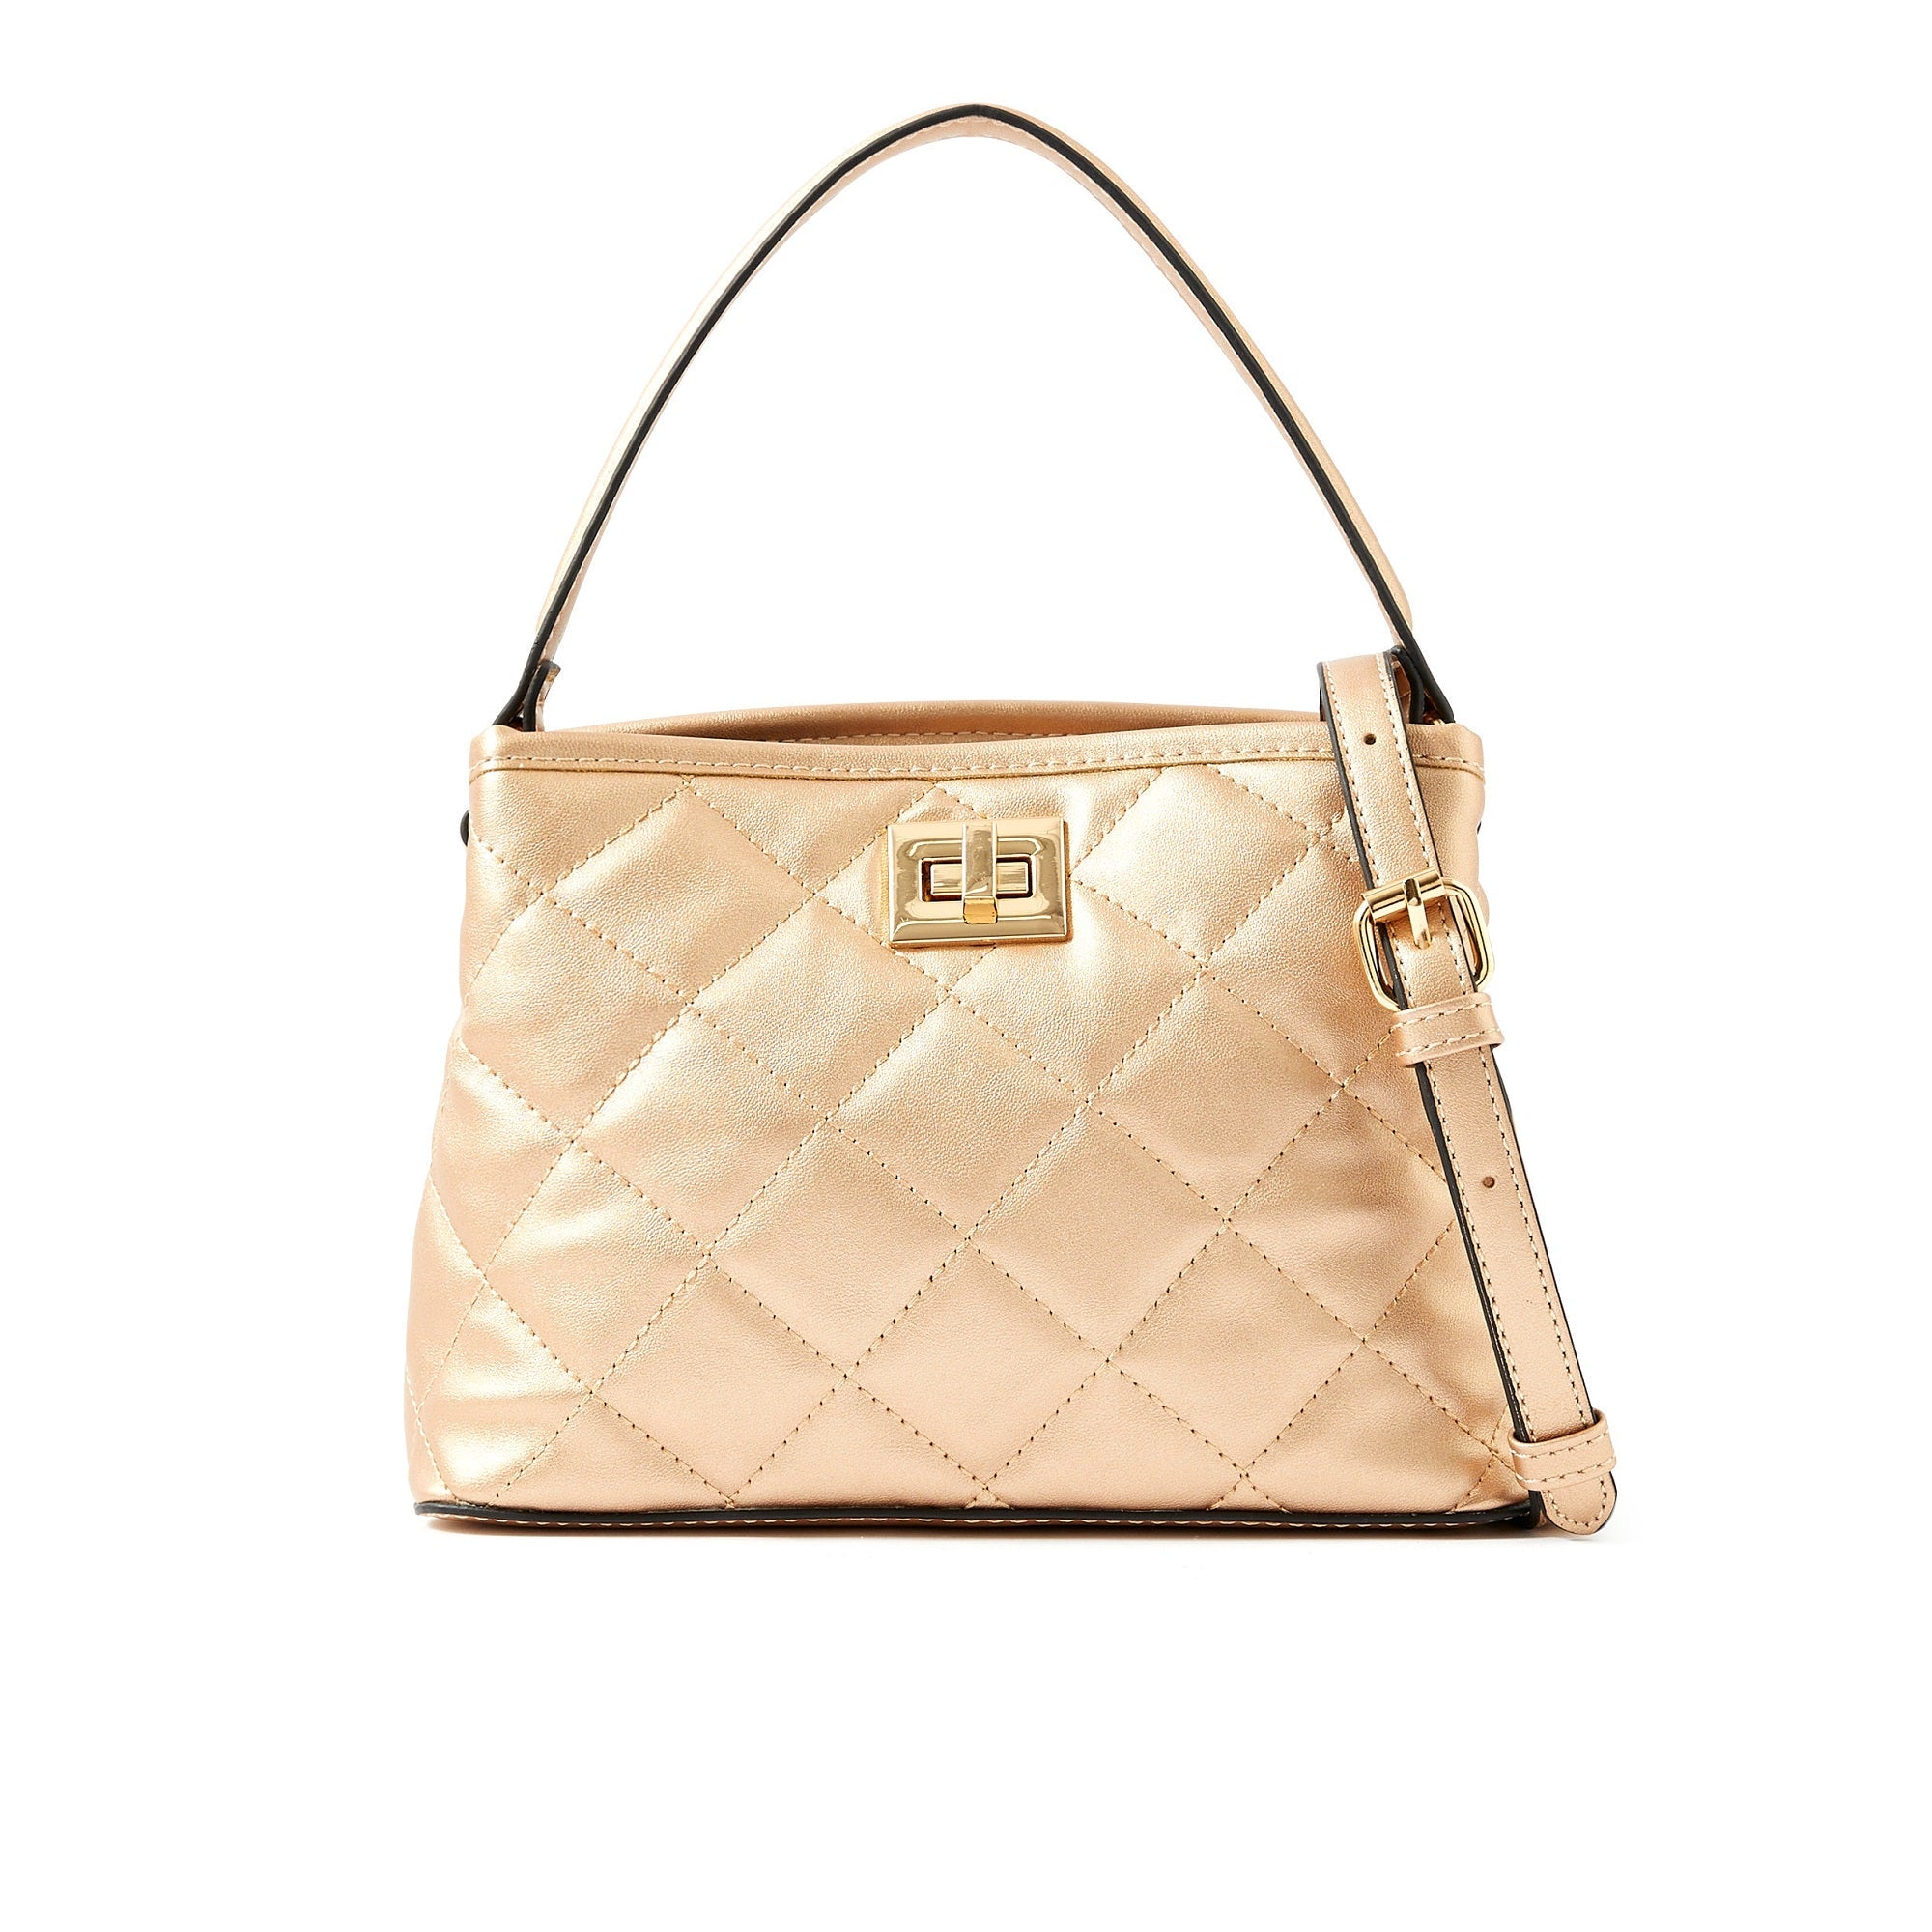 Accessorize London women's Faux Leather Rose gold Quilted Handheld Small Satchel bag